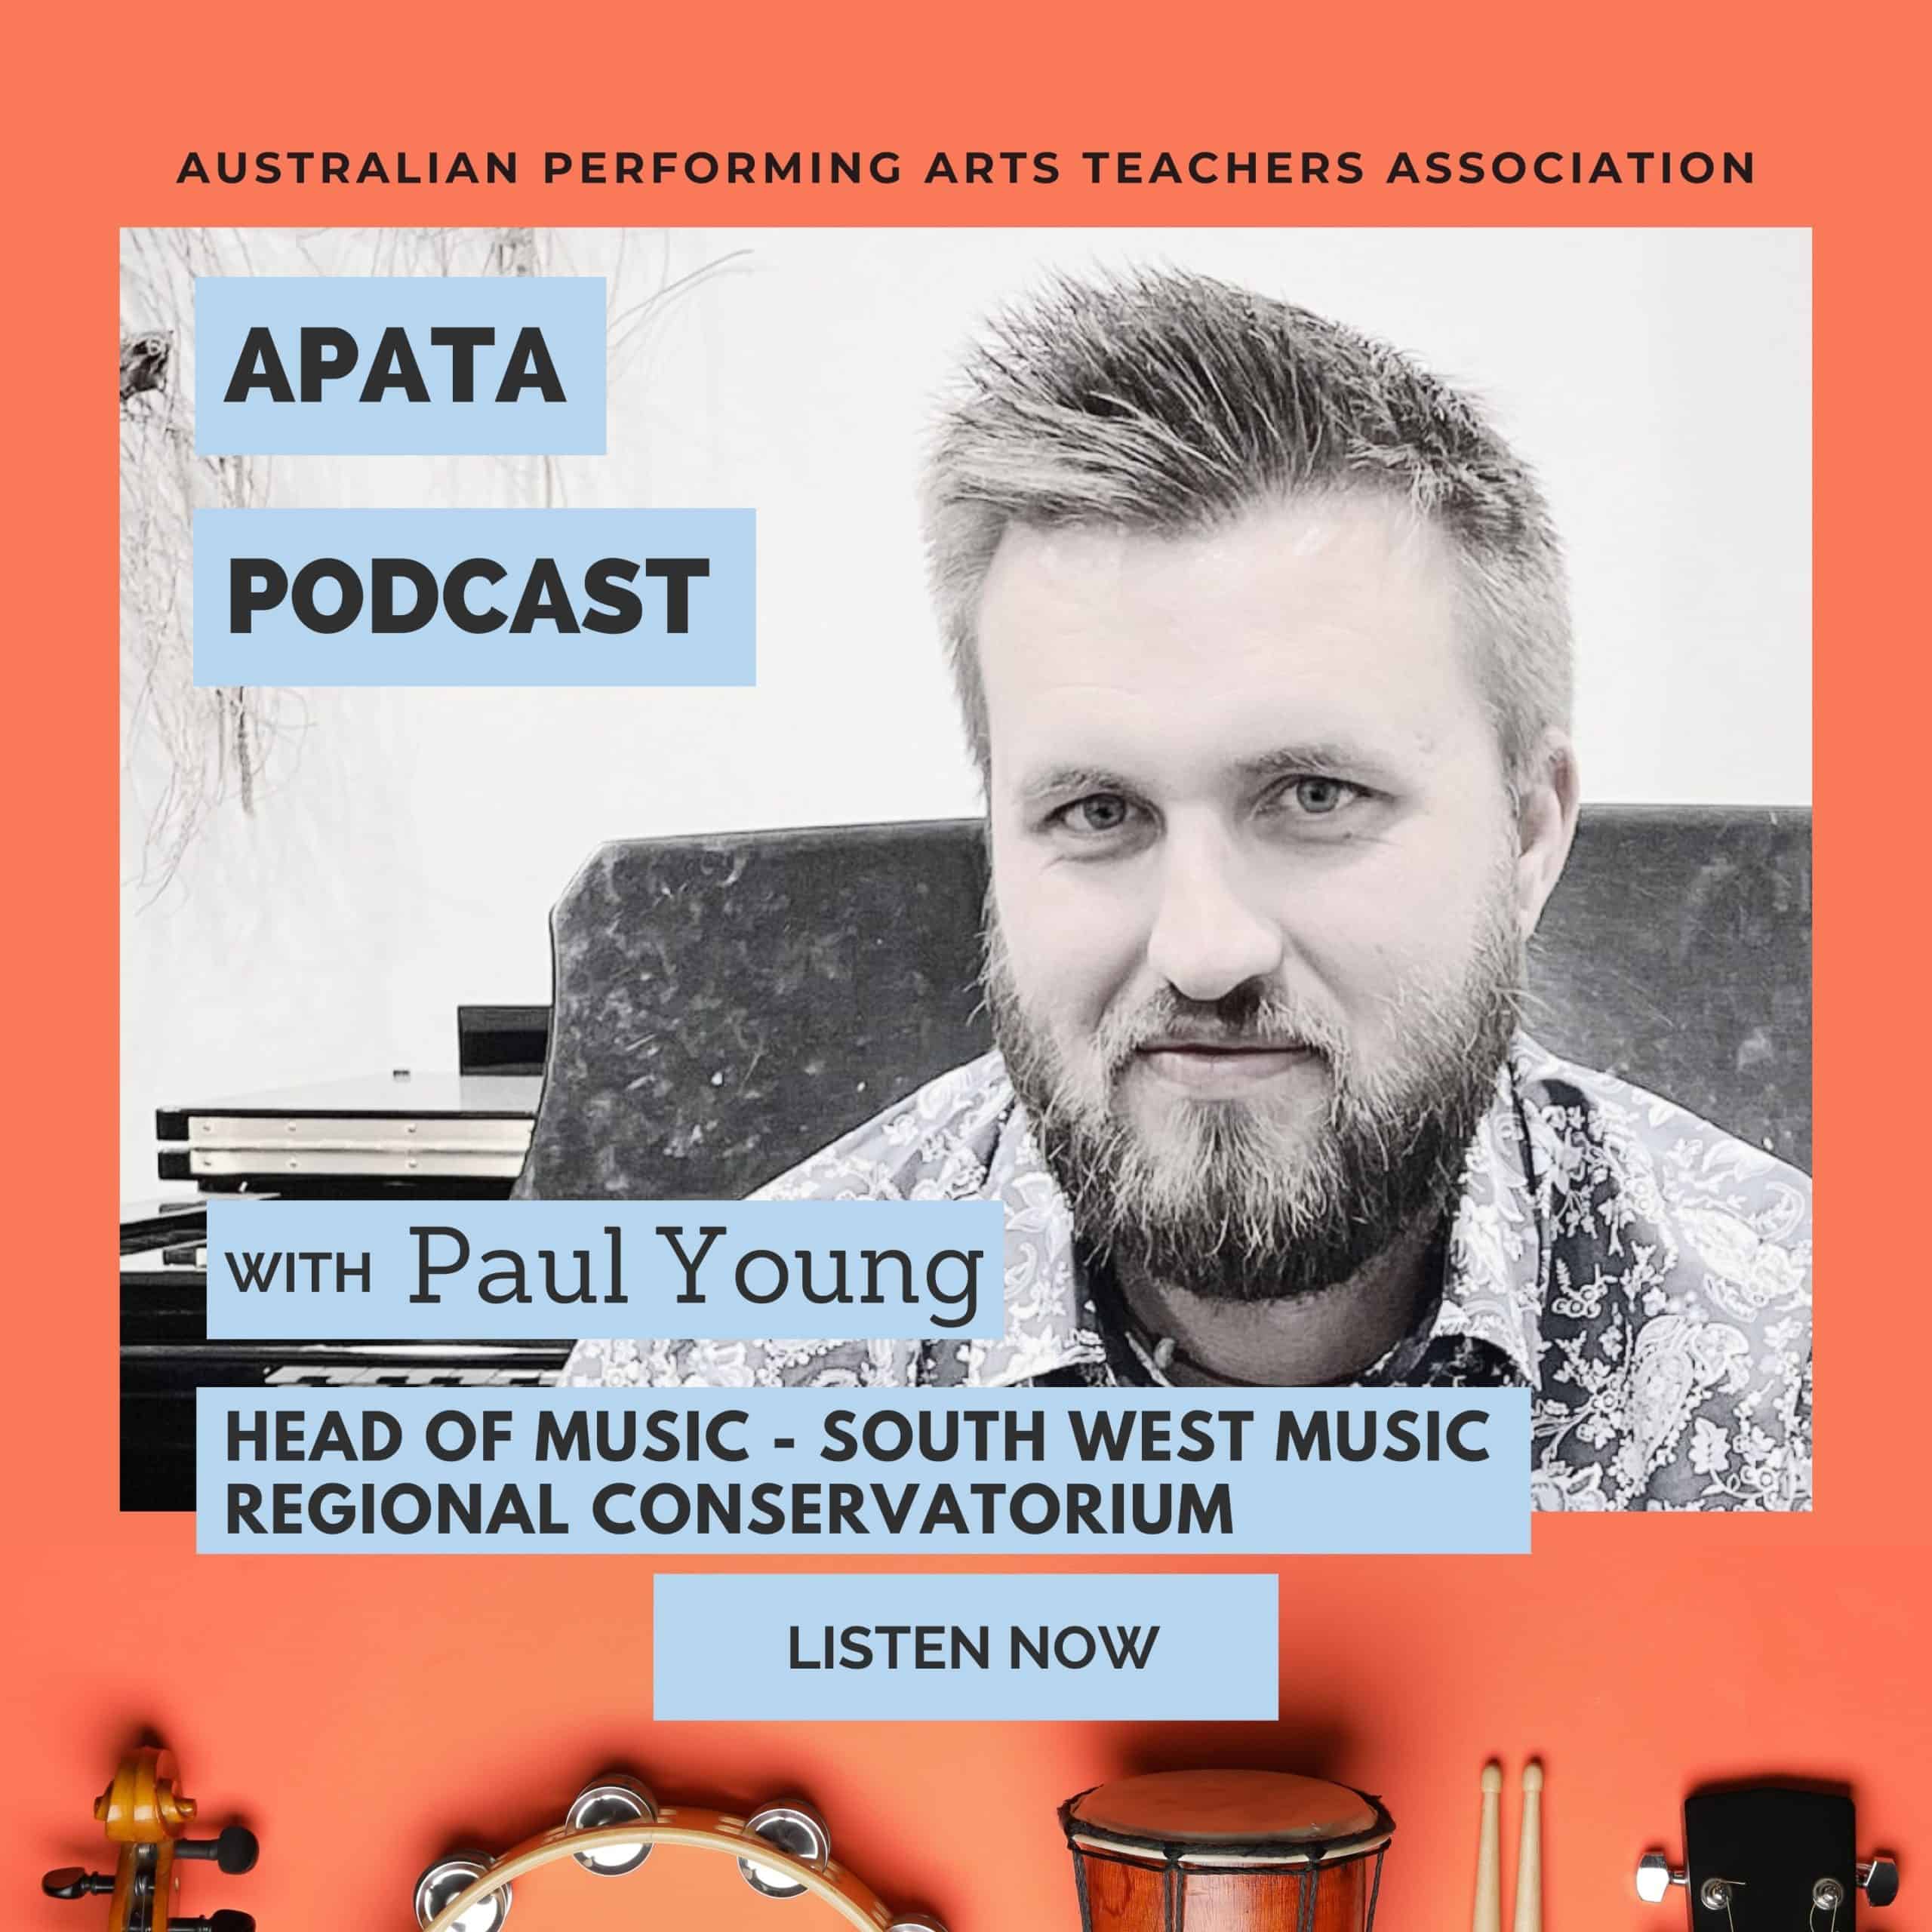 APATA Podcast with Paul Young